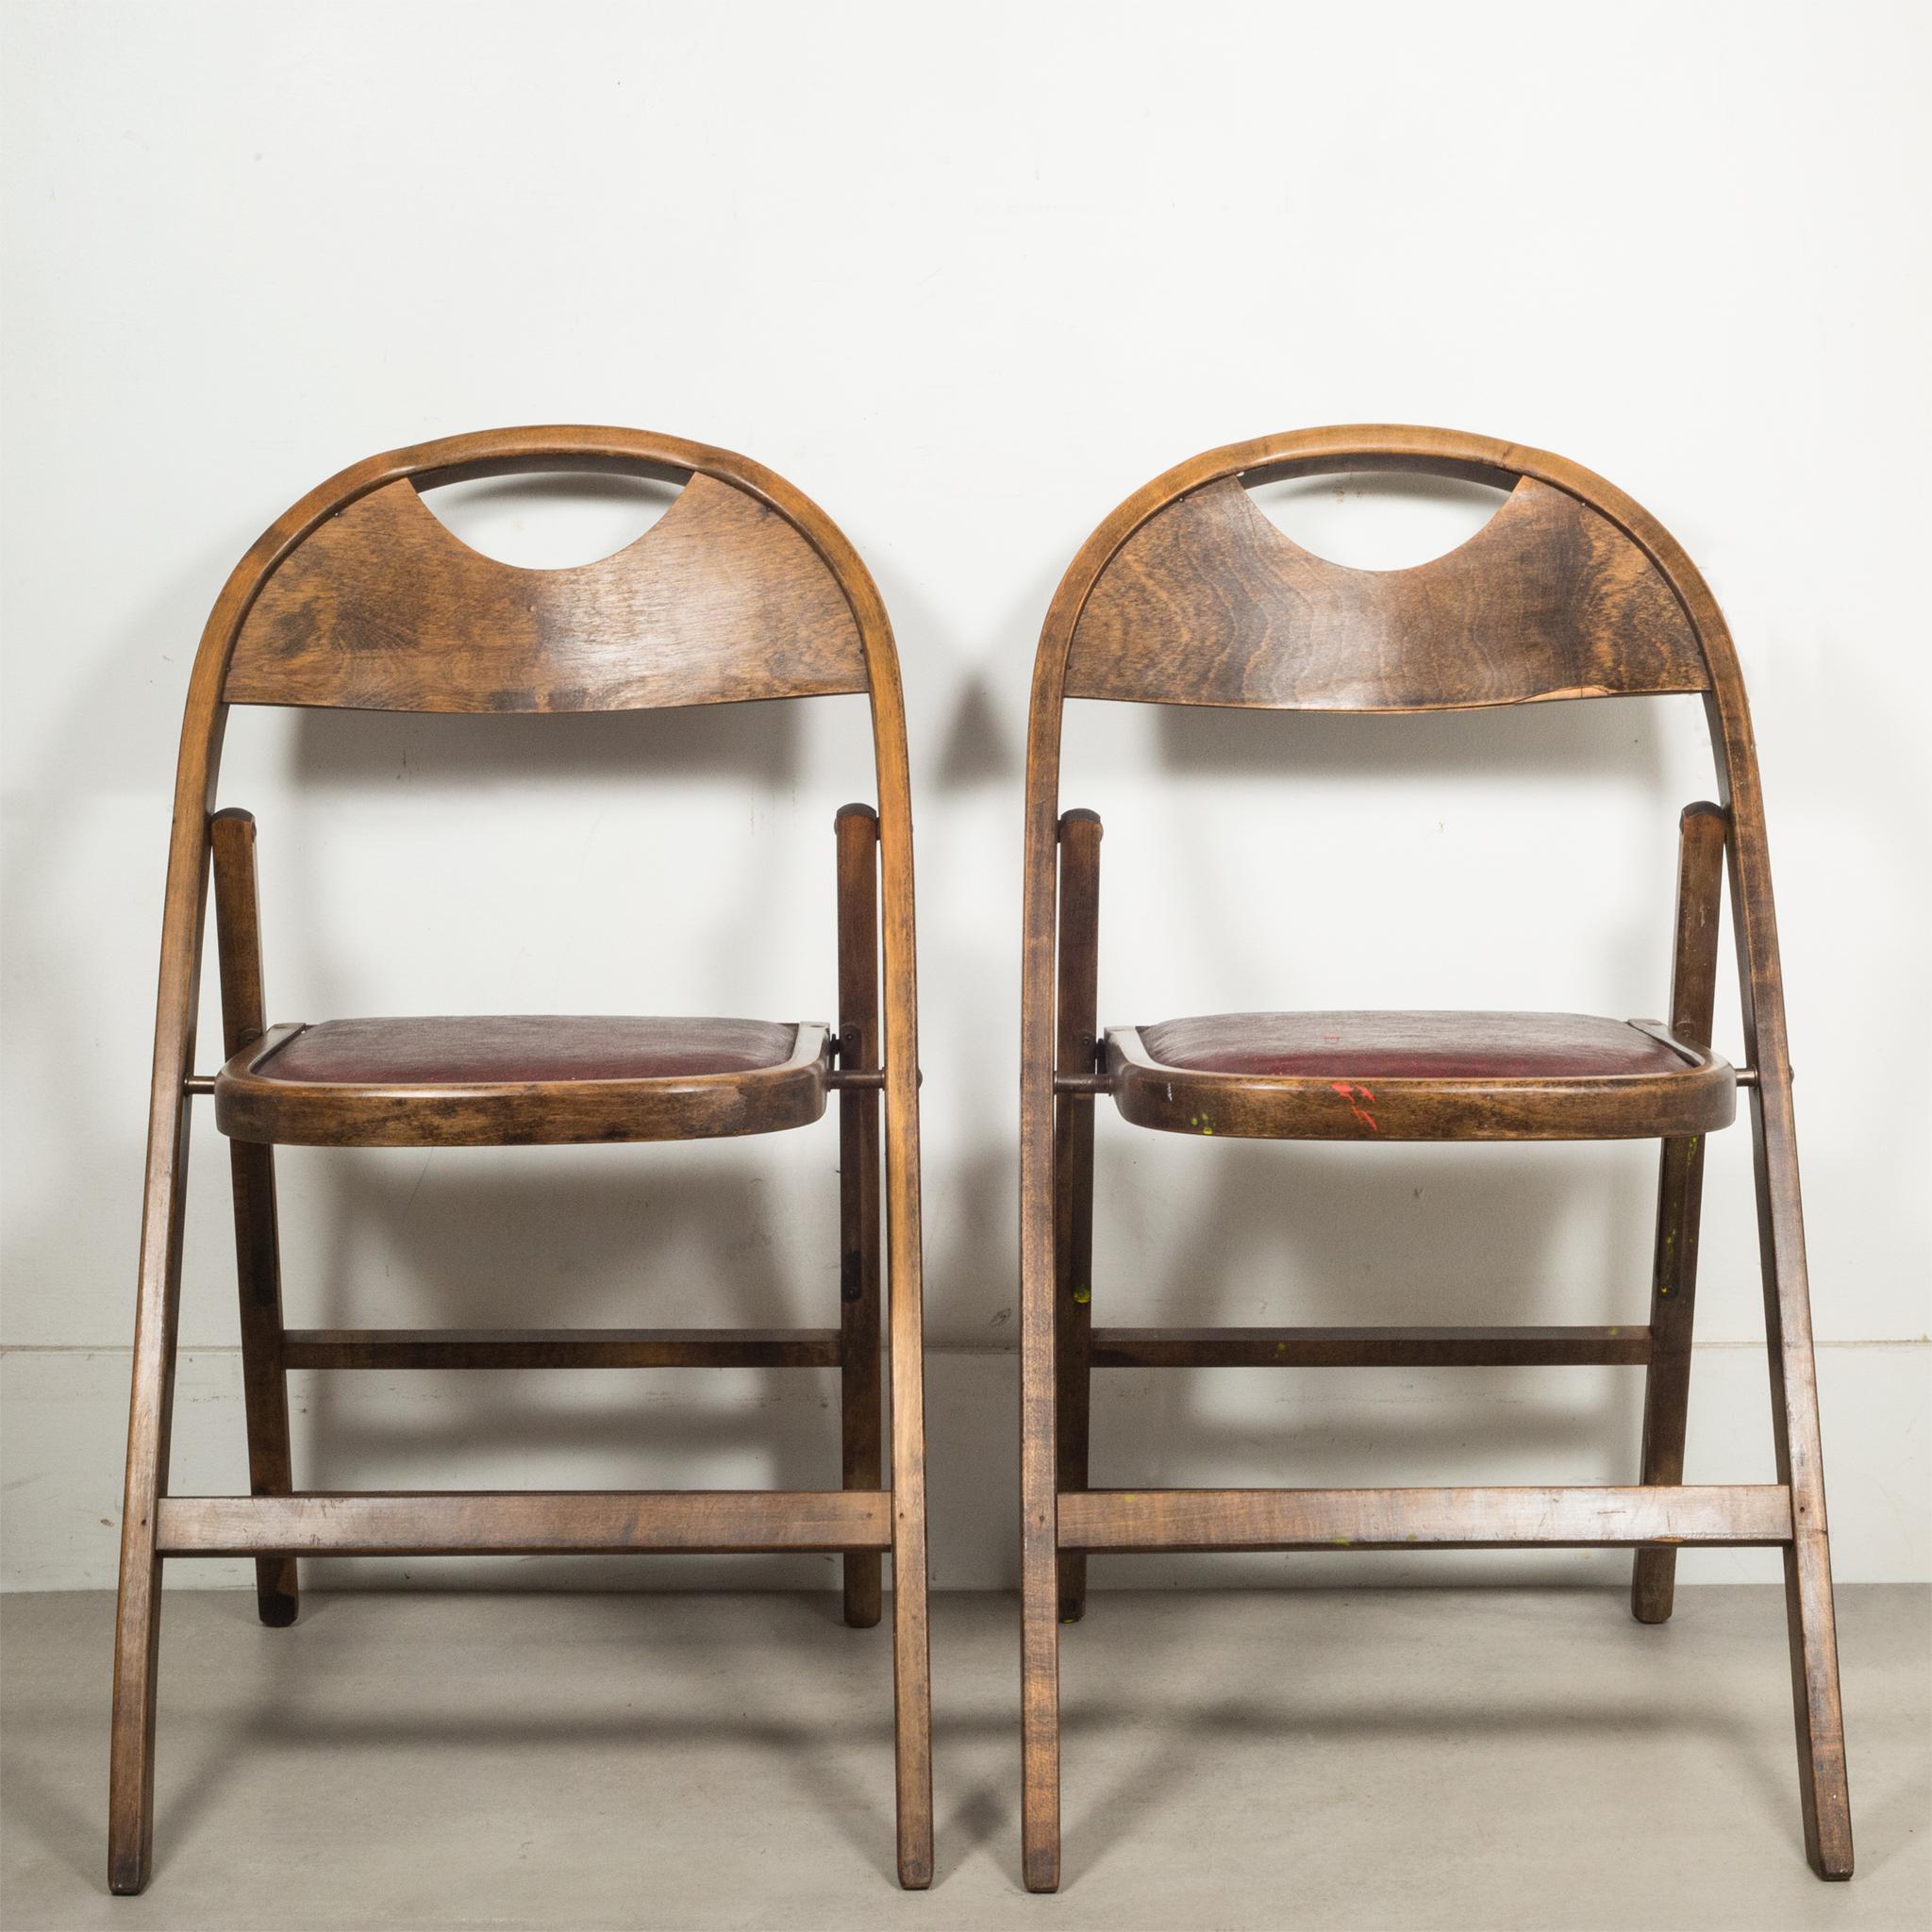 About
A set of four wooden folding chairs with original vinyl seats. Last used in a theater in Oakland, Ca. The chairs fold up easily and have retained much of their original paint. All four are sturdy and structural sound. Each are have the